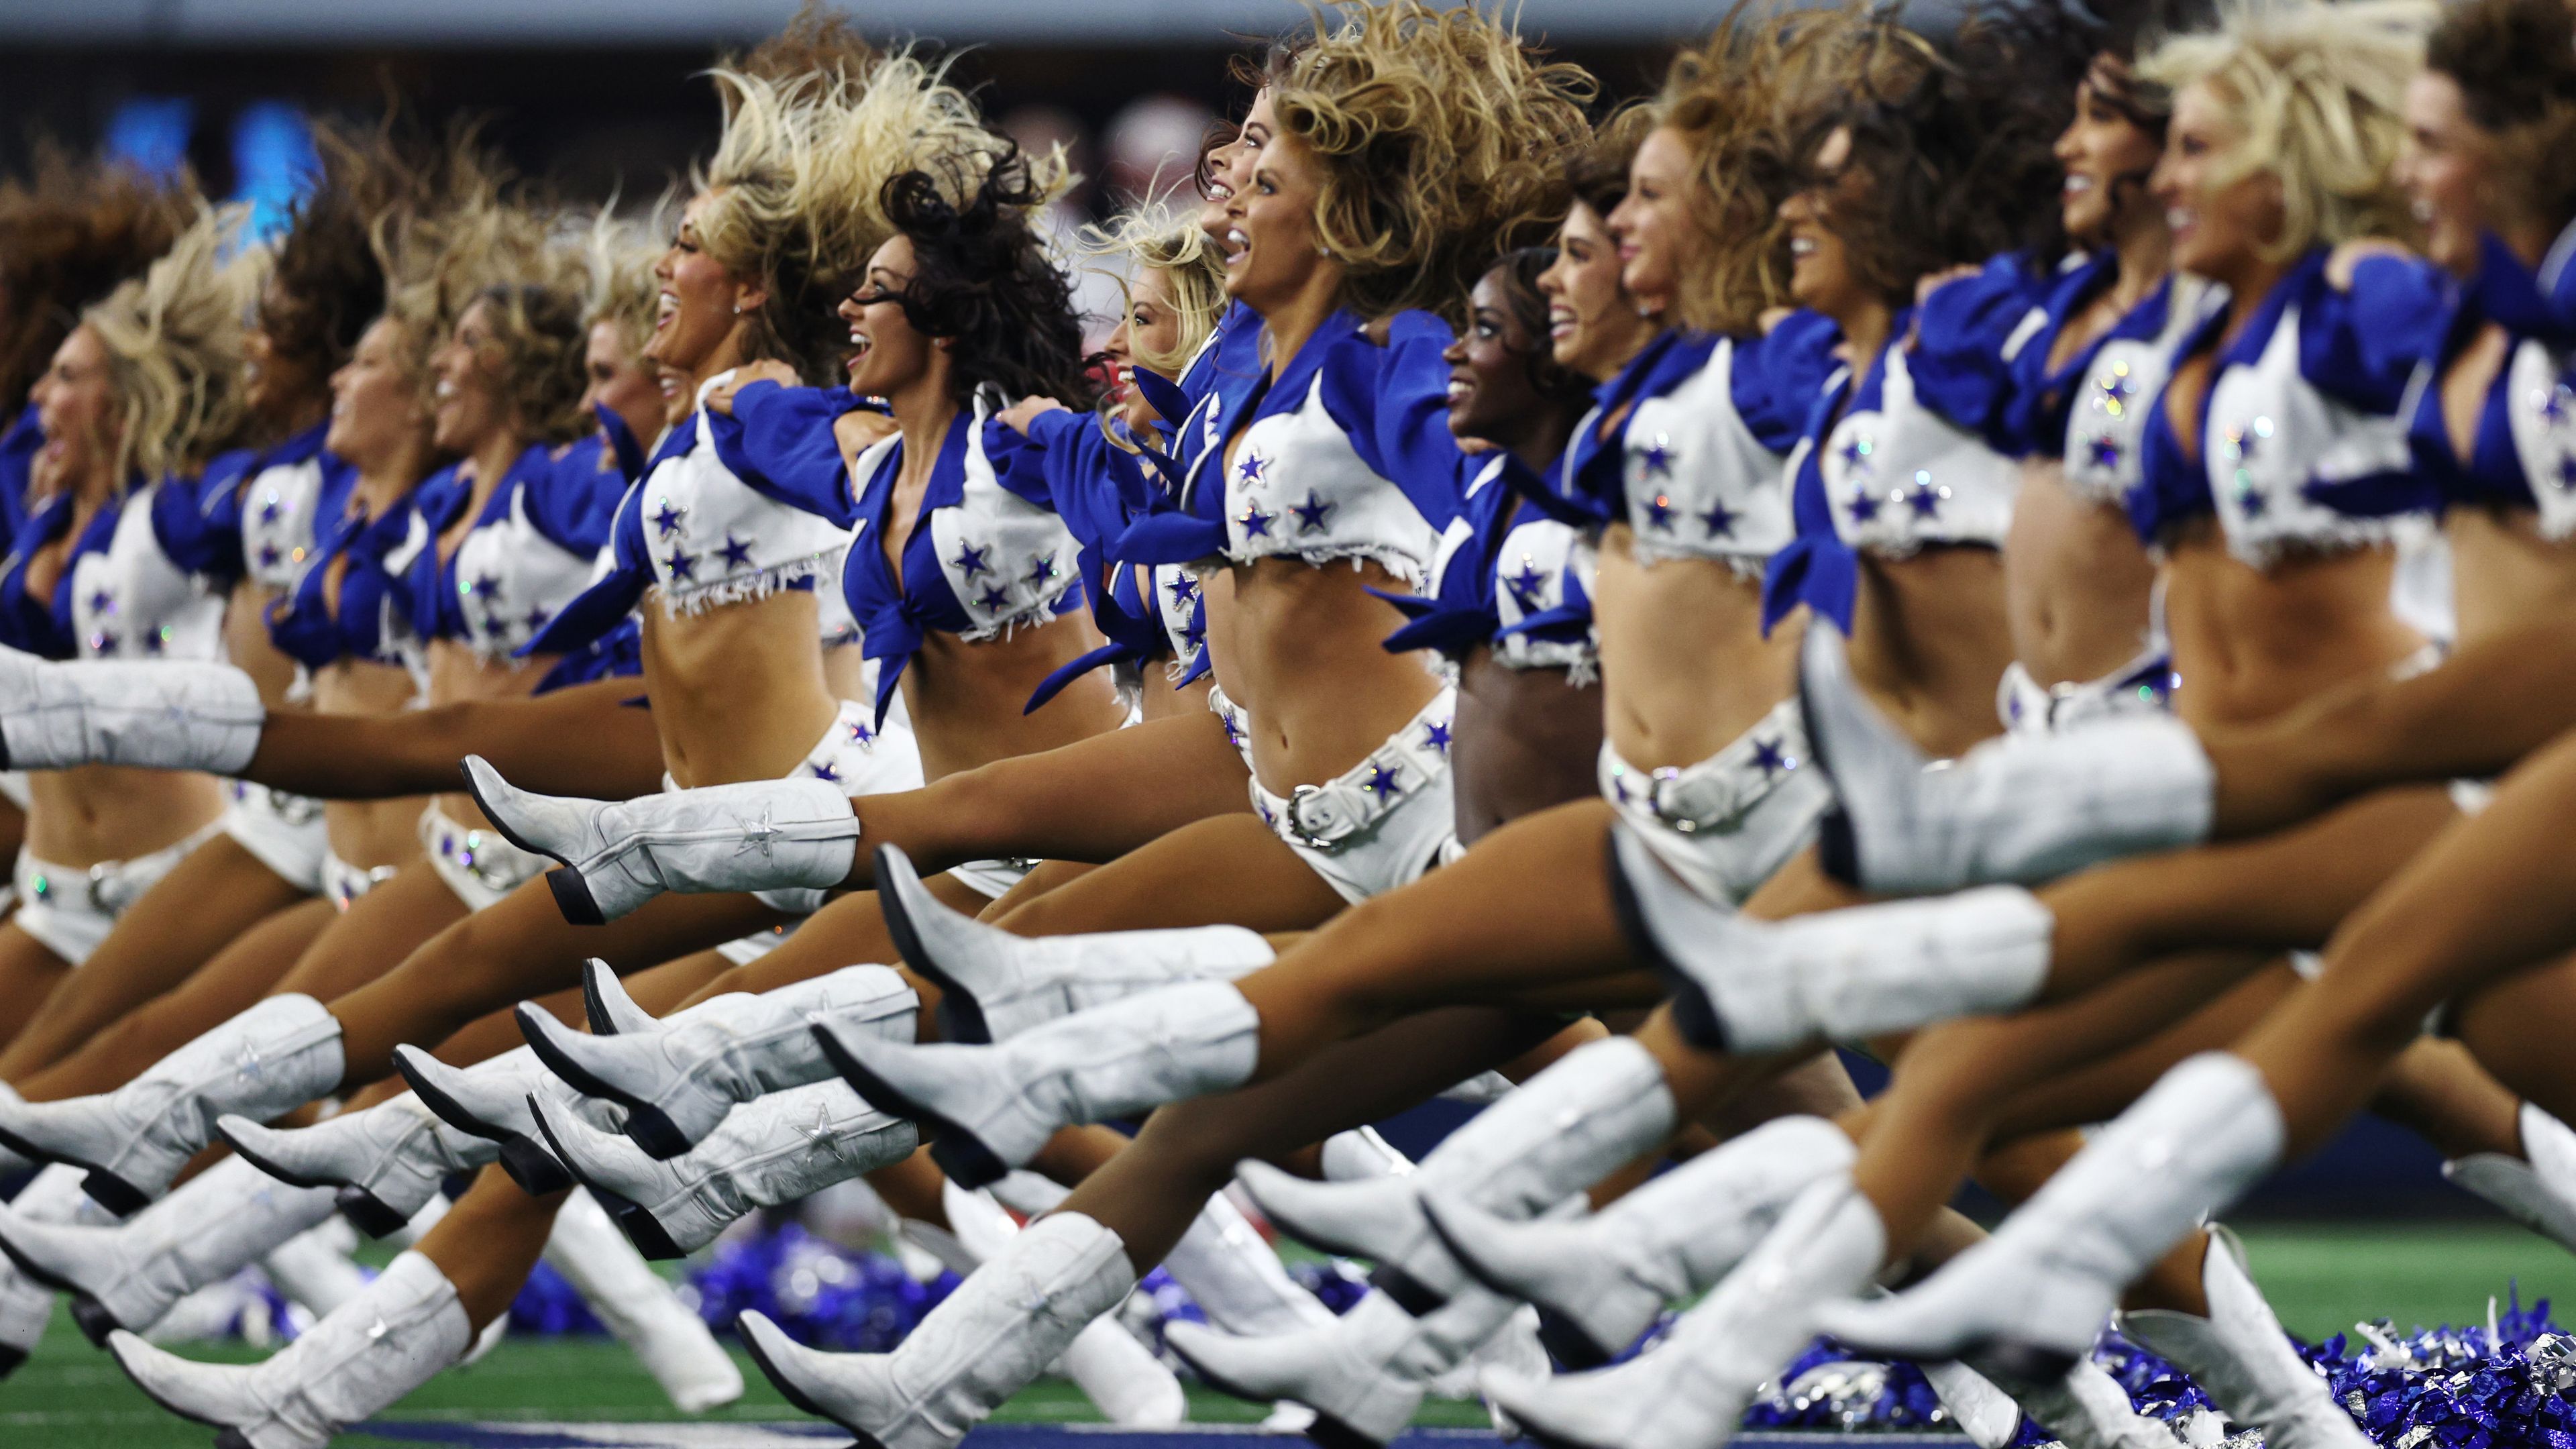 Dallas Cowboys cheerleaders were paid $3.3 million in exchange for silence after shocking alleged incident